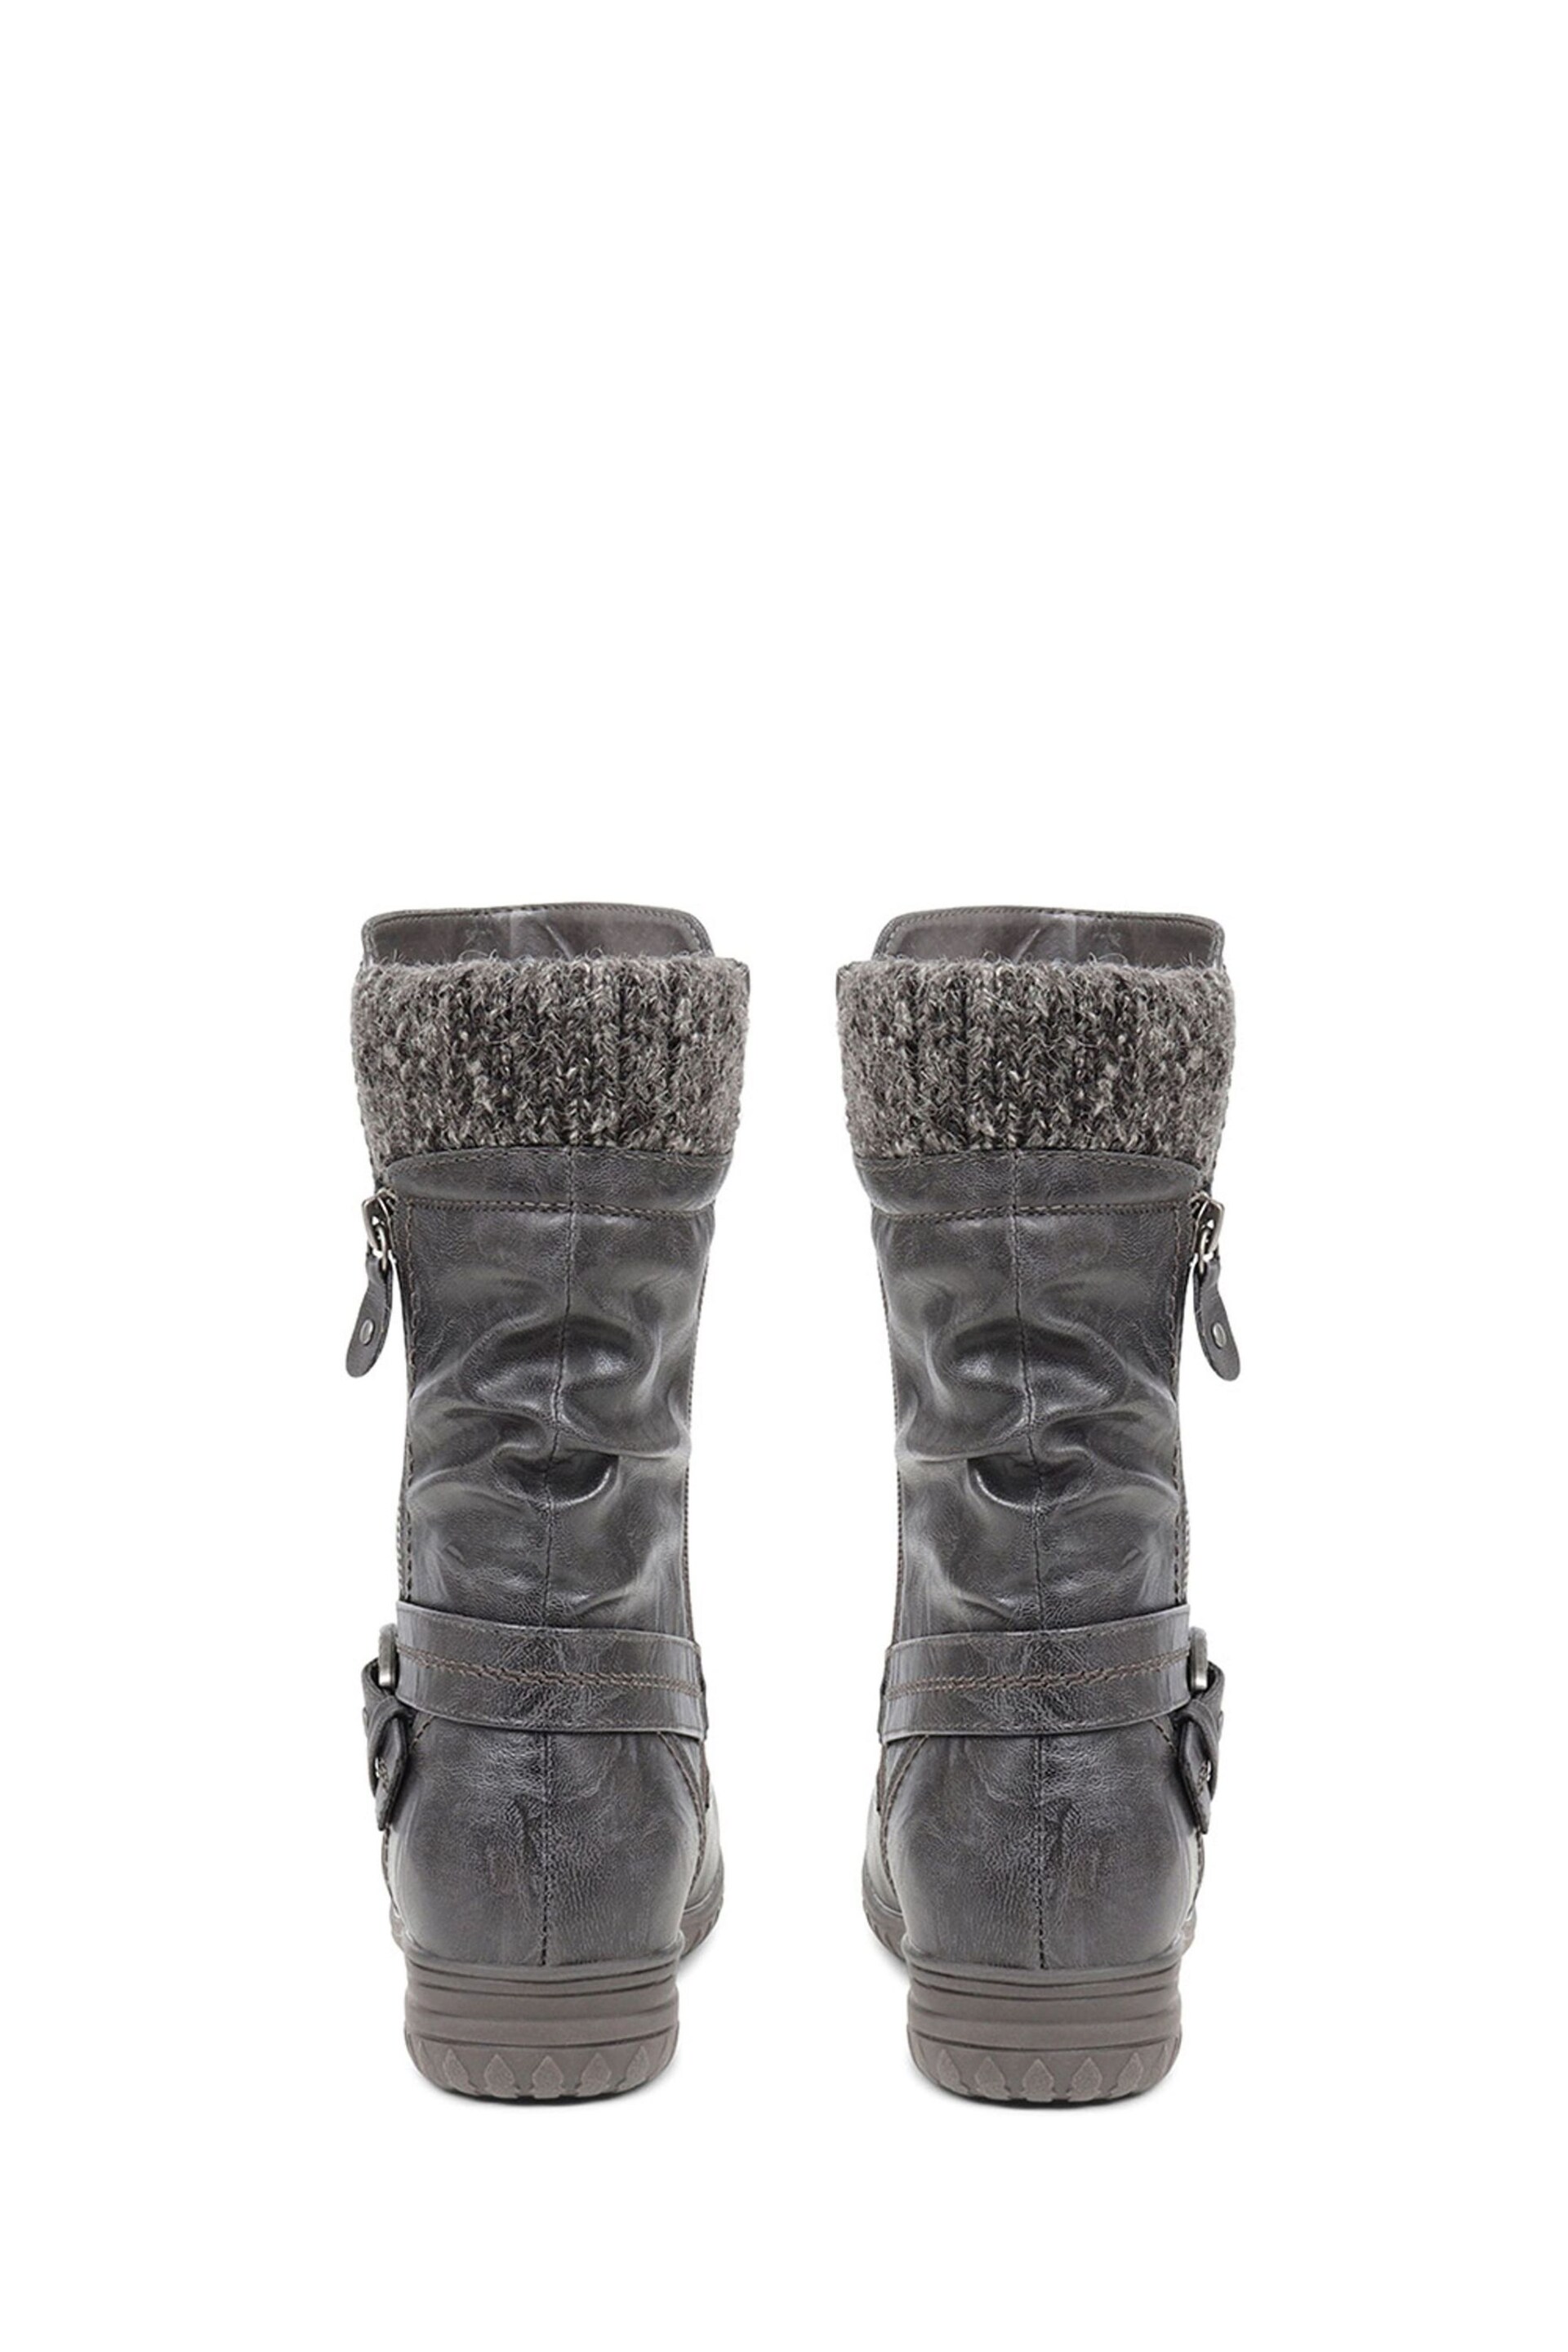 Pavers Grey Slouch Calf Boots - Image 3 of 4